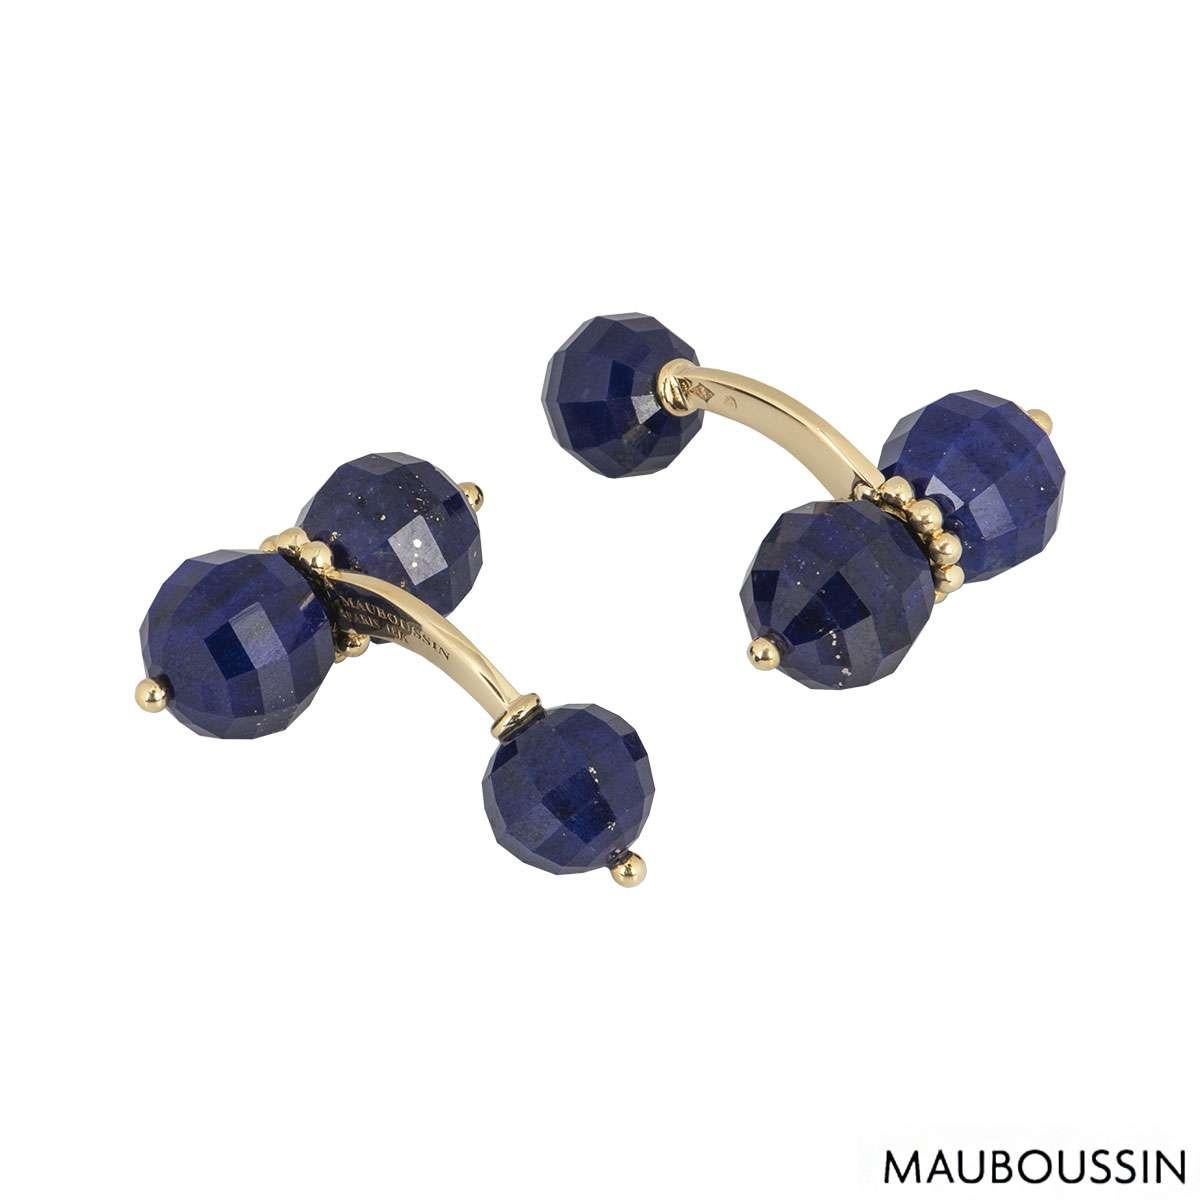 An 18k yellow gold pair of lapis lazuli cufflinks by Mauboussin. Each cufflink is set with 3 faceted lapis balls set with a part beaded stem and a single bead on the sides. The cufflinks have a length of 1.2 inch and width of 0.9 inch with a gross